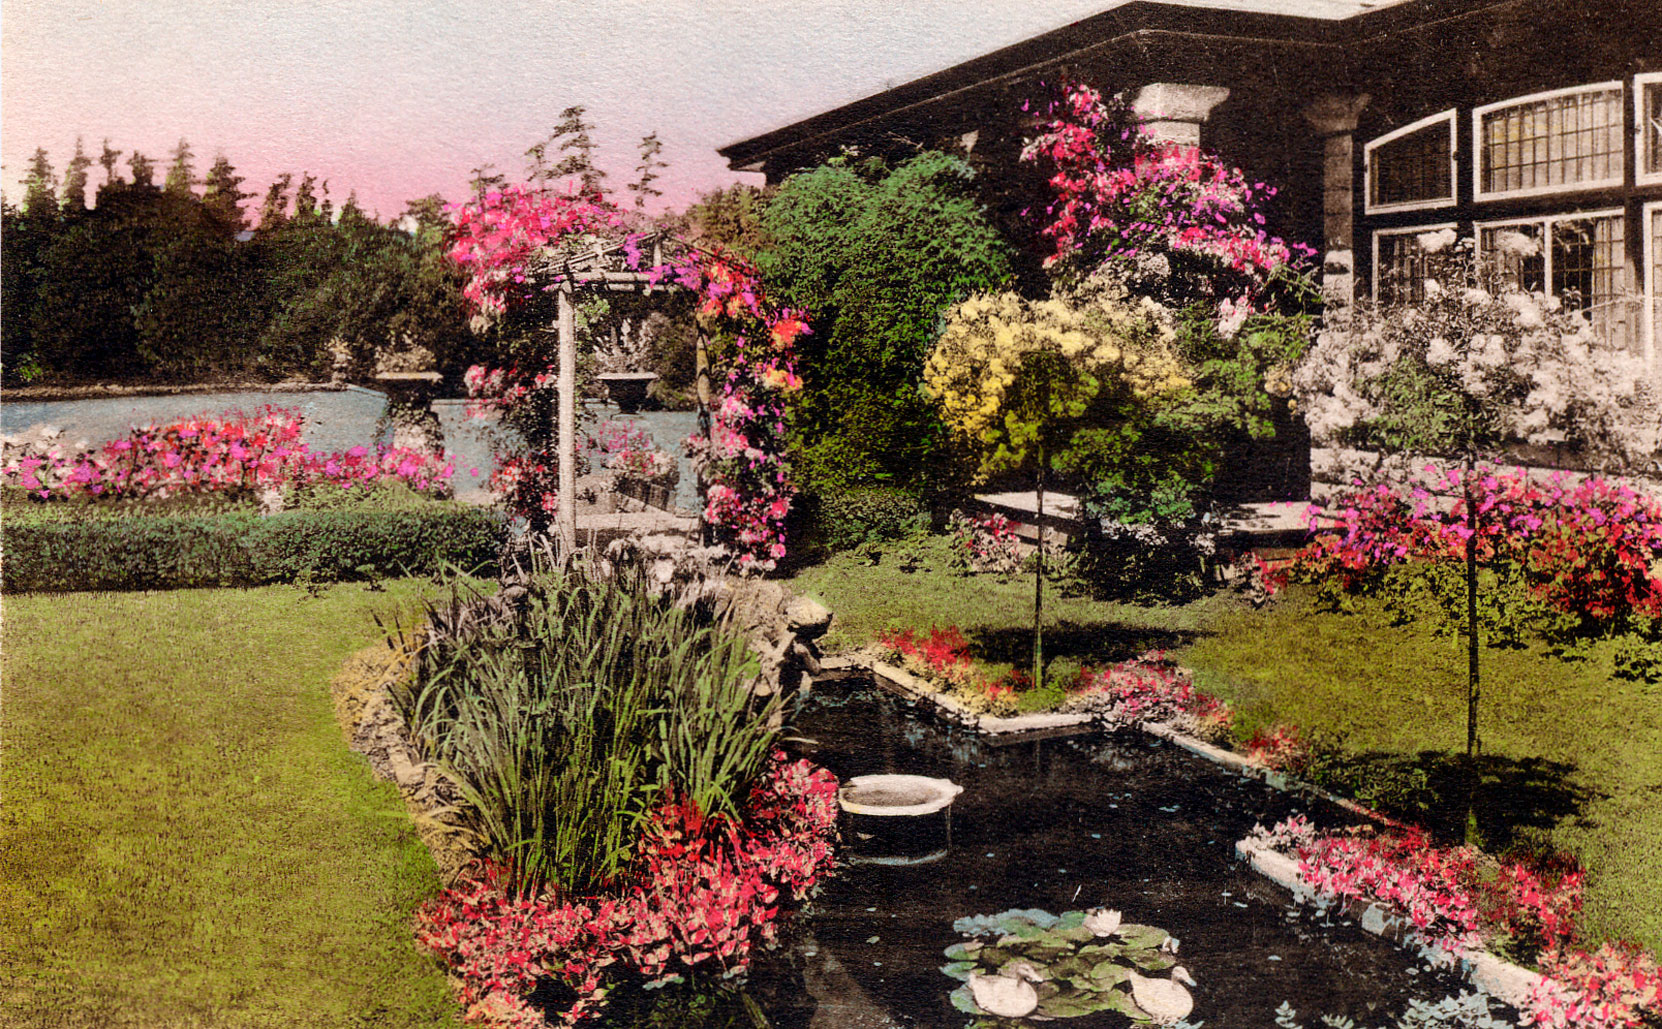 Postcard showing the 1911 Sun Room addition to Benvenuto and the site of Jennie Butchart's Private Garden, circa 1912-1919. (Author's collection)